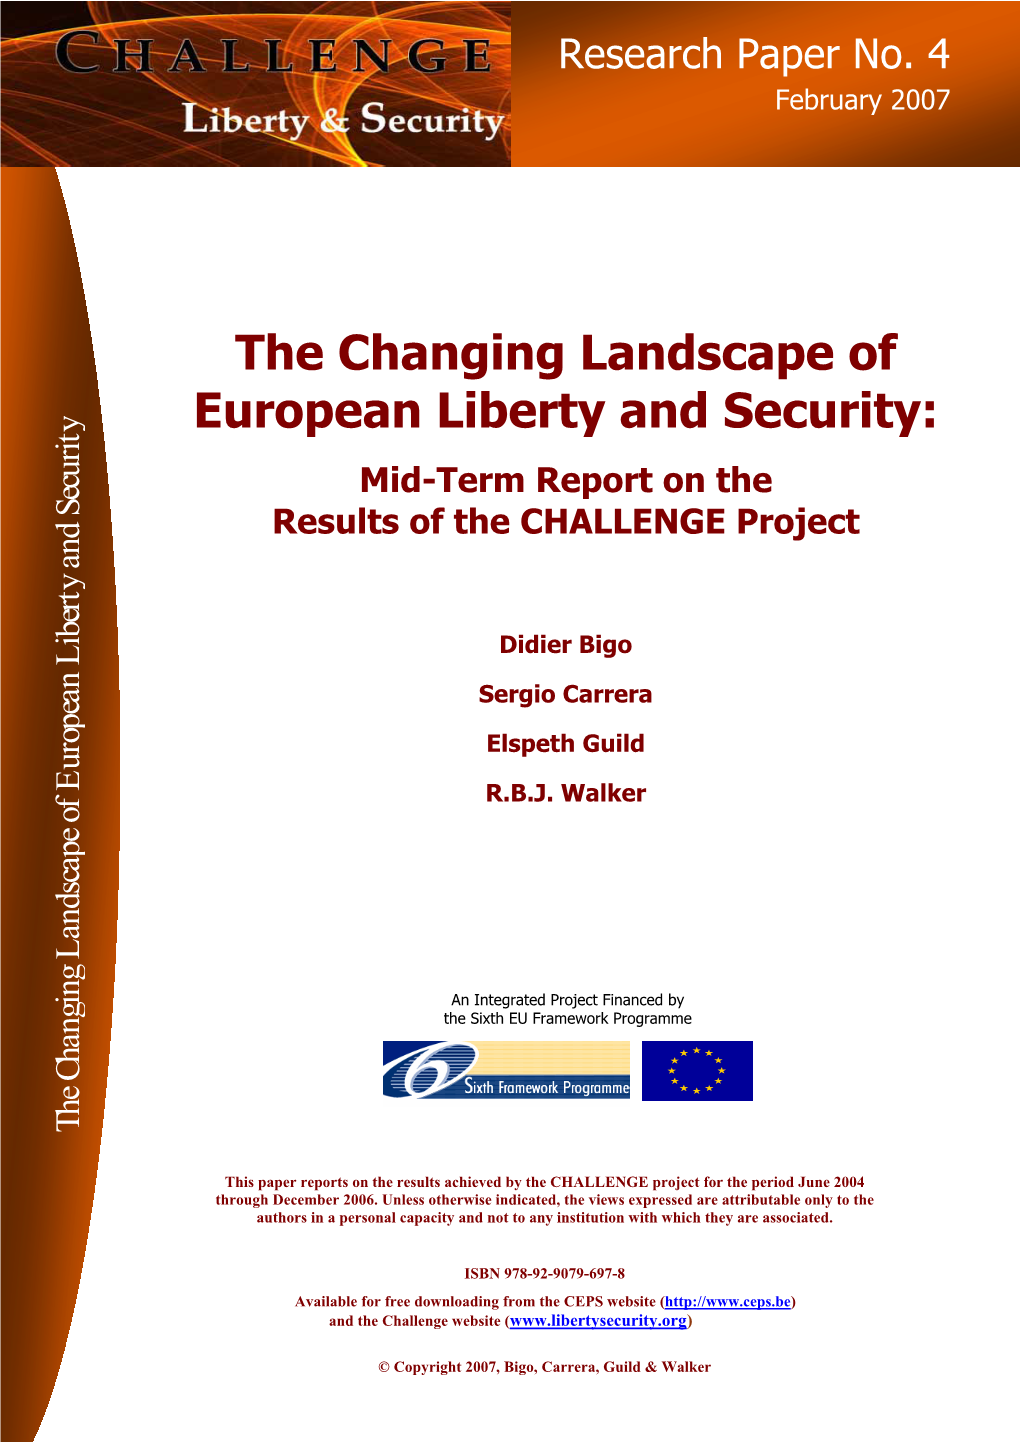 The Changing Landscape of European Liberty and Security: Mid-Term Report on the Results of the Challenge Project ∗ Didier Bigo, Sergio Carrera, Elspeth Guild & R